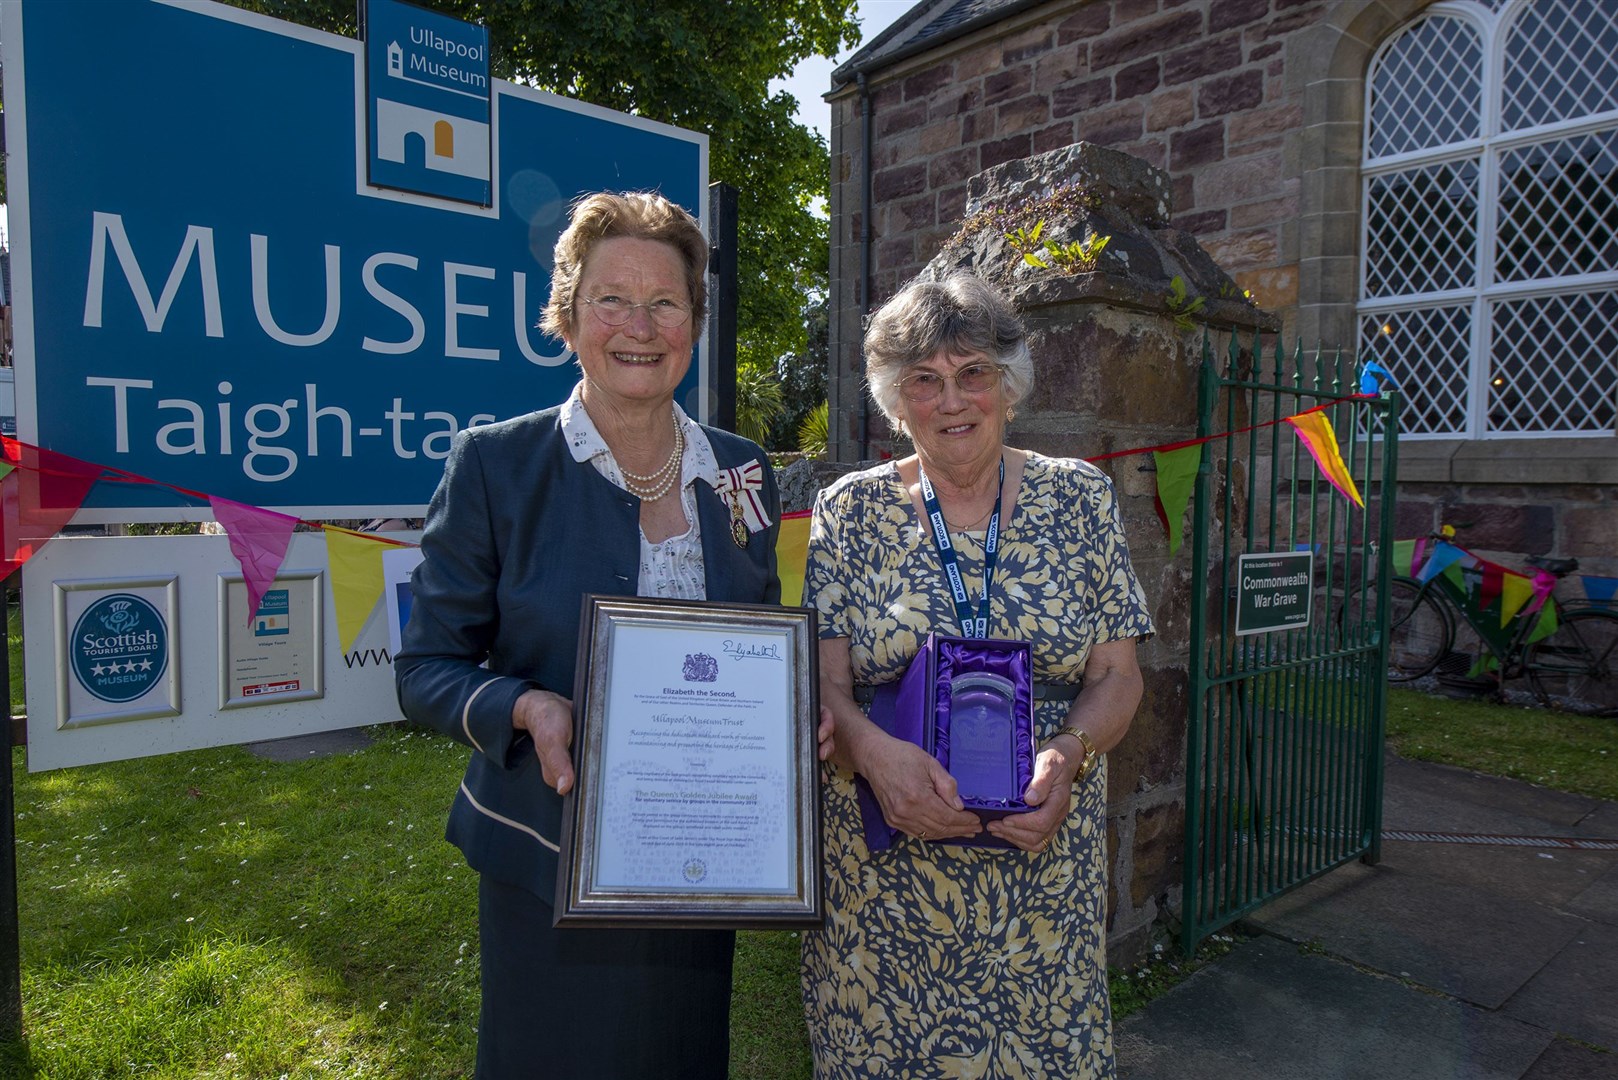 Janet Bowen with Ellie Ing of Ullapool Museum.